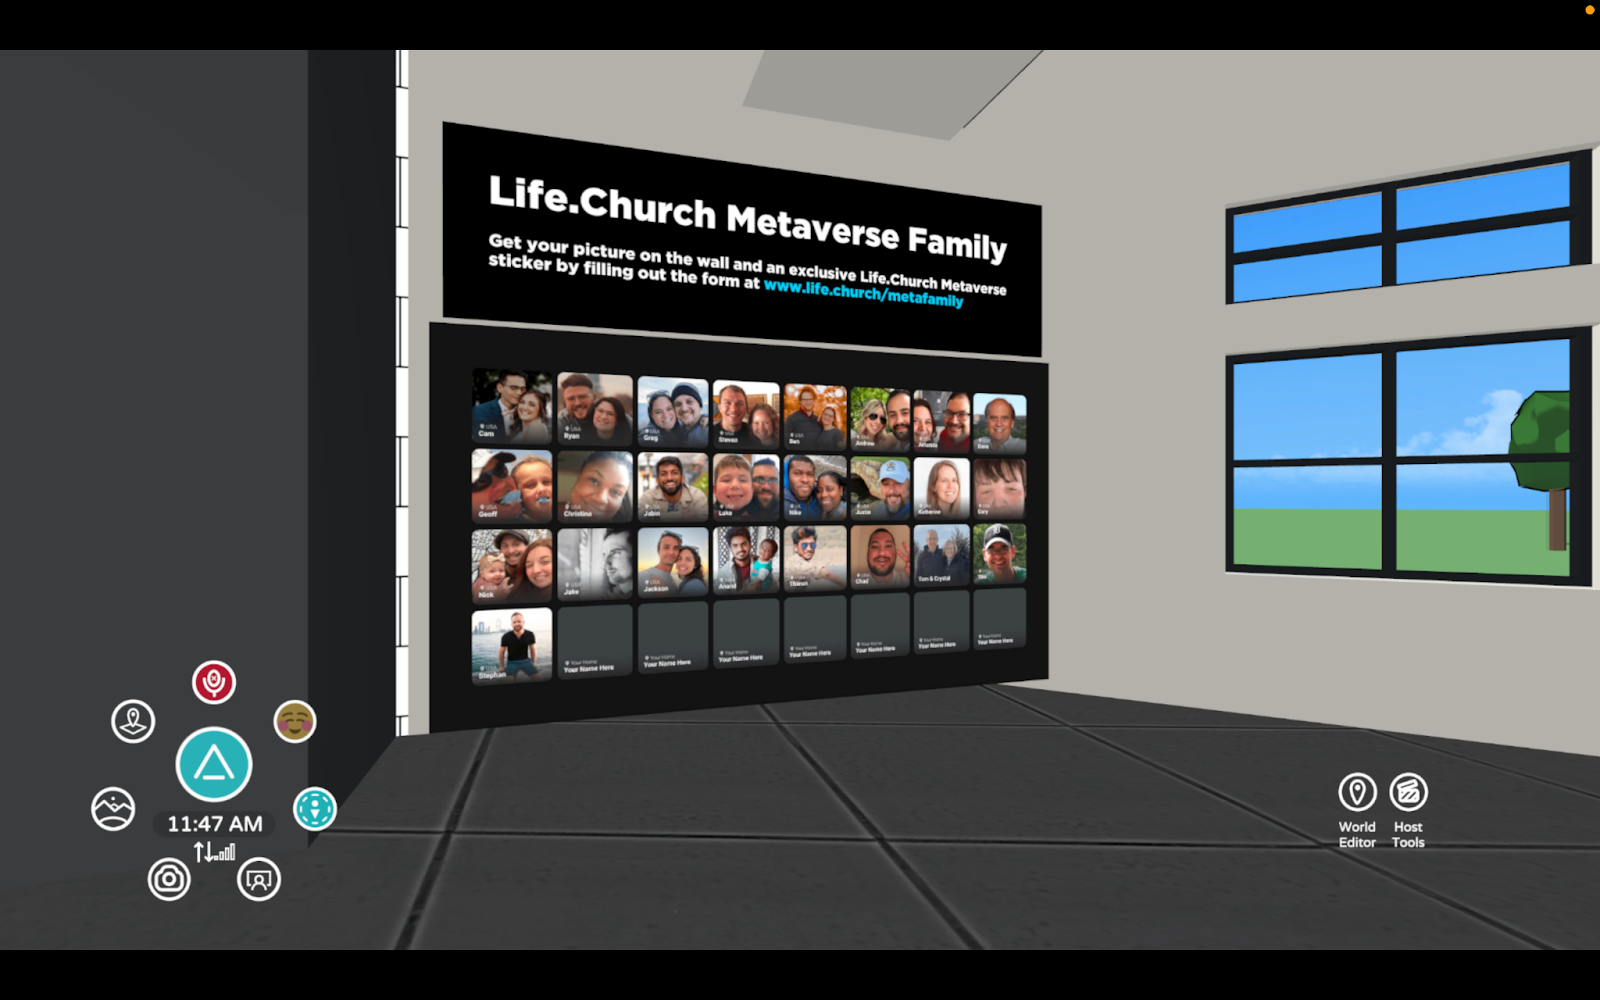 10 Insights from 10 Weeks of Church in the Metaverse